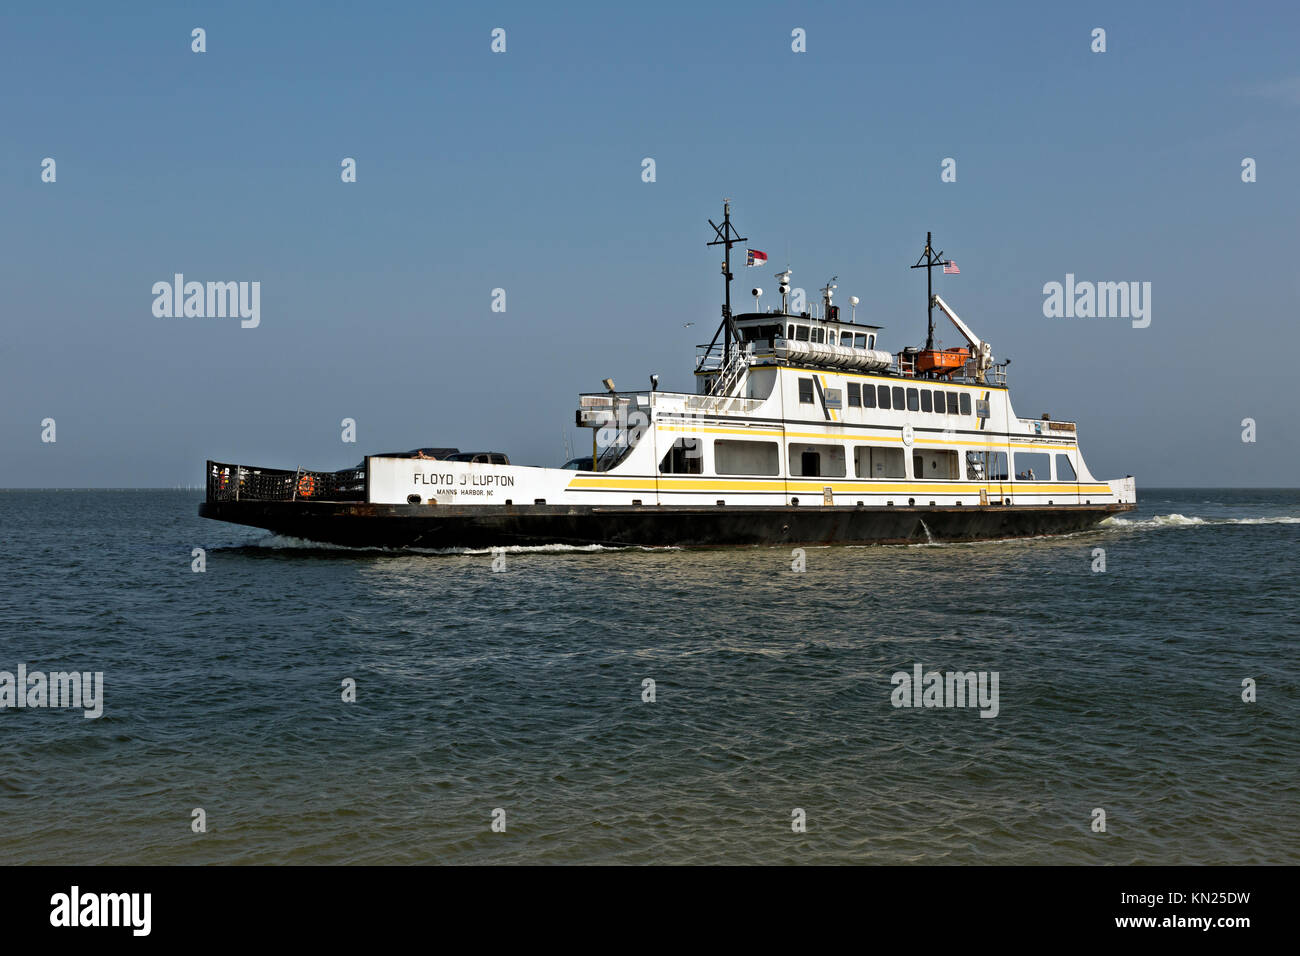 NC01049-00...NORTH CAROLINA - Ocracoke to Hatteras ferry on Pamlico Sound coming into the Ocracoke Island terminal. Stock Photo